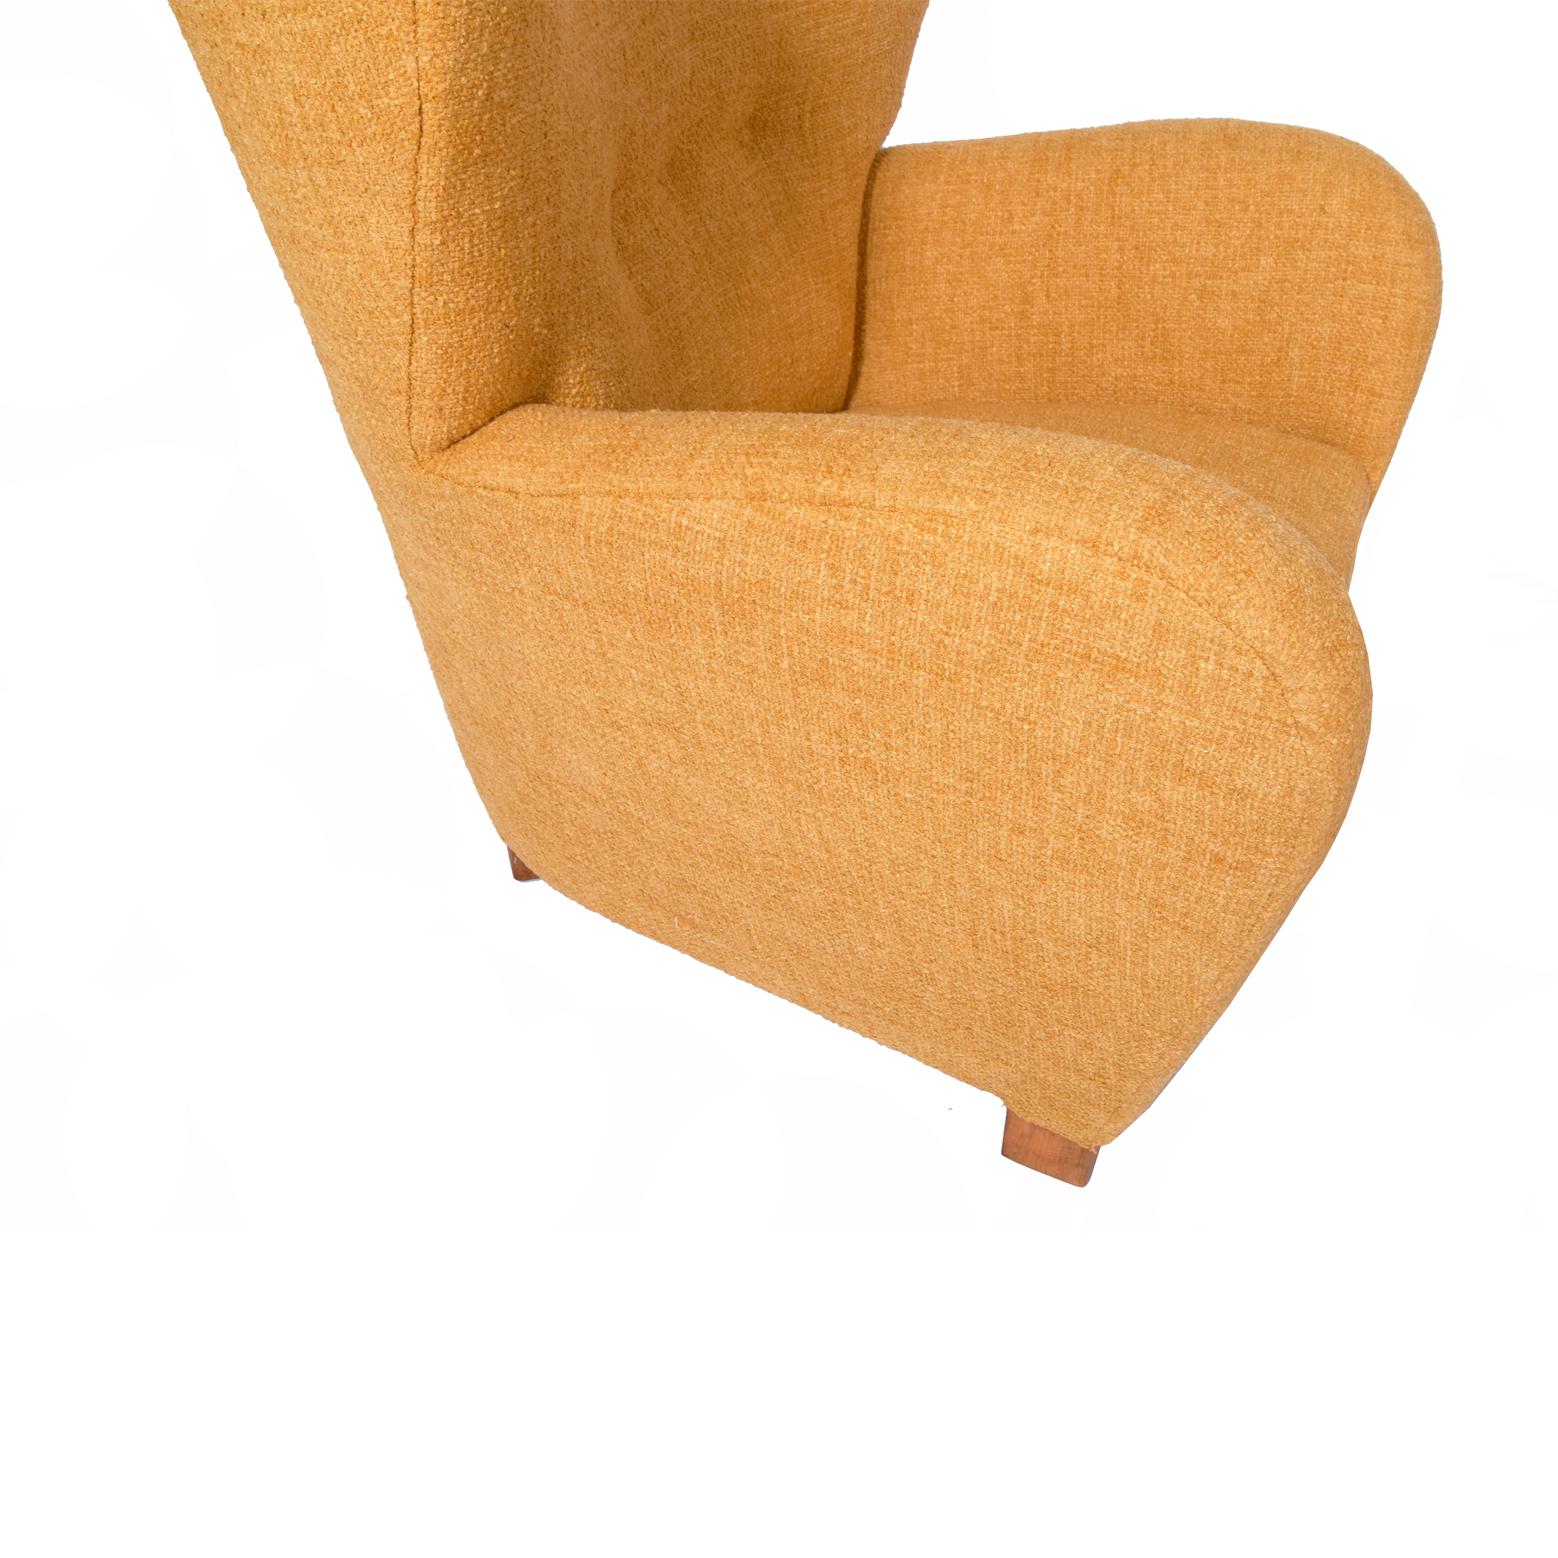 Mid-20th Century Scandinavian Easy Chair, 1930's For Sale